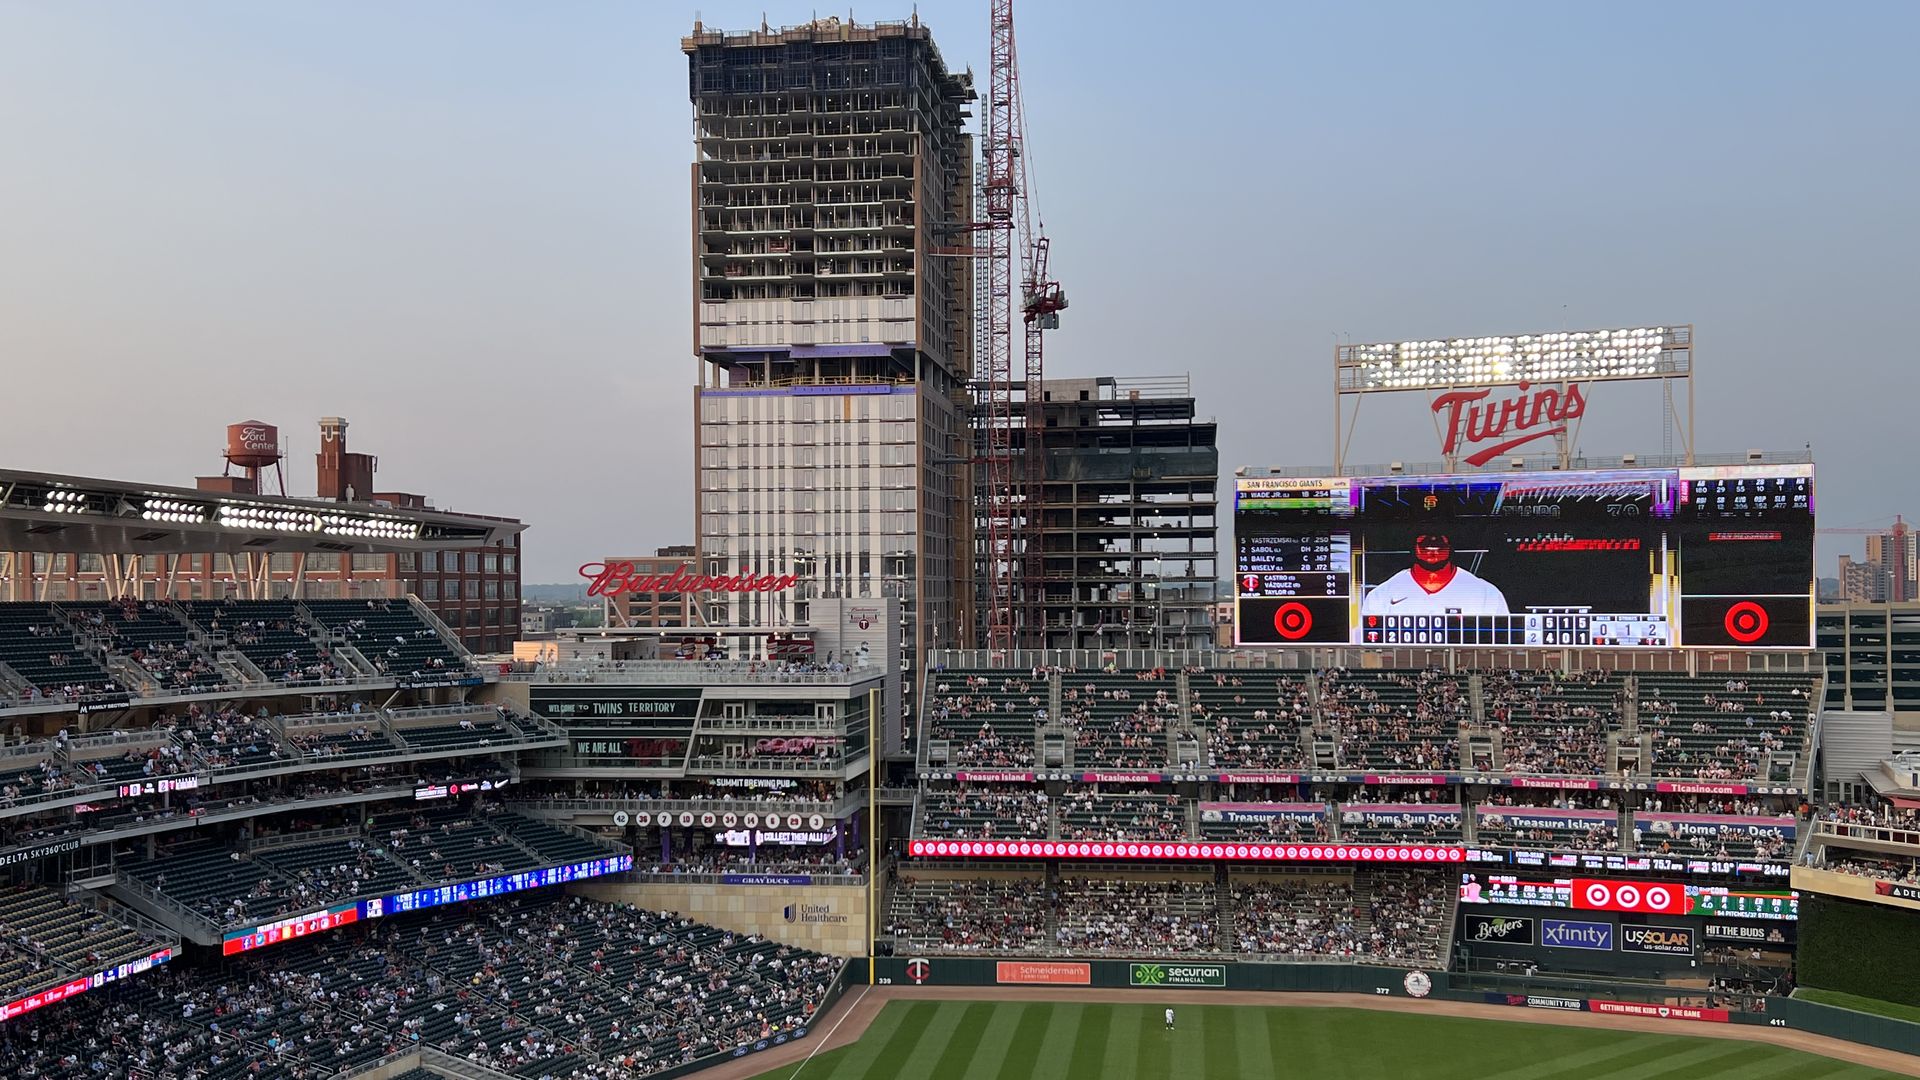 Towers next to Target Field have apartments, offices and ballpark